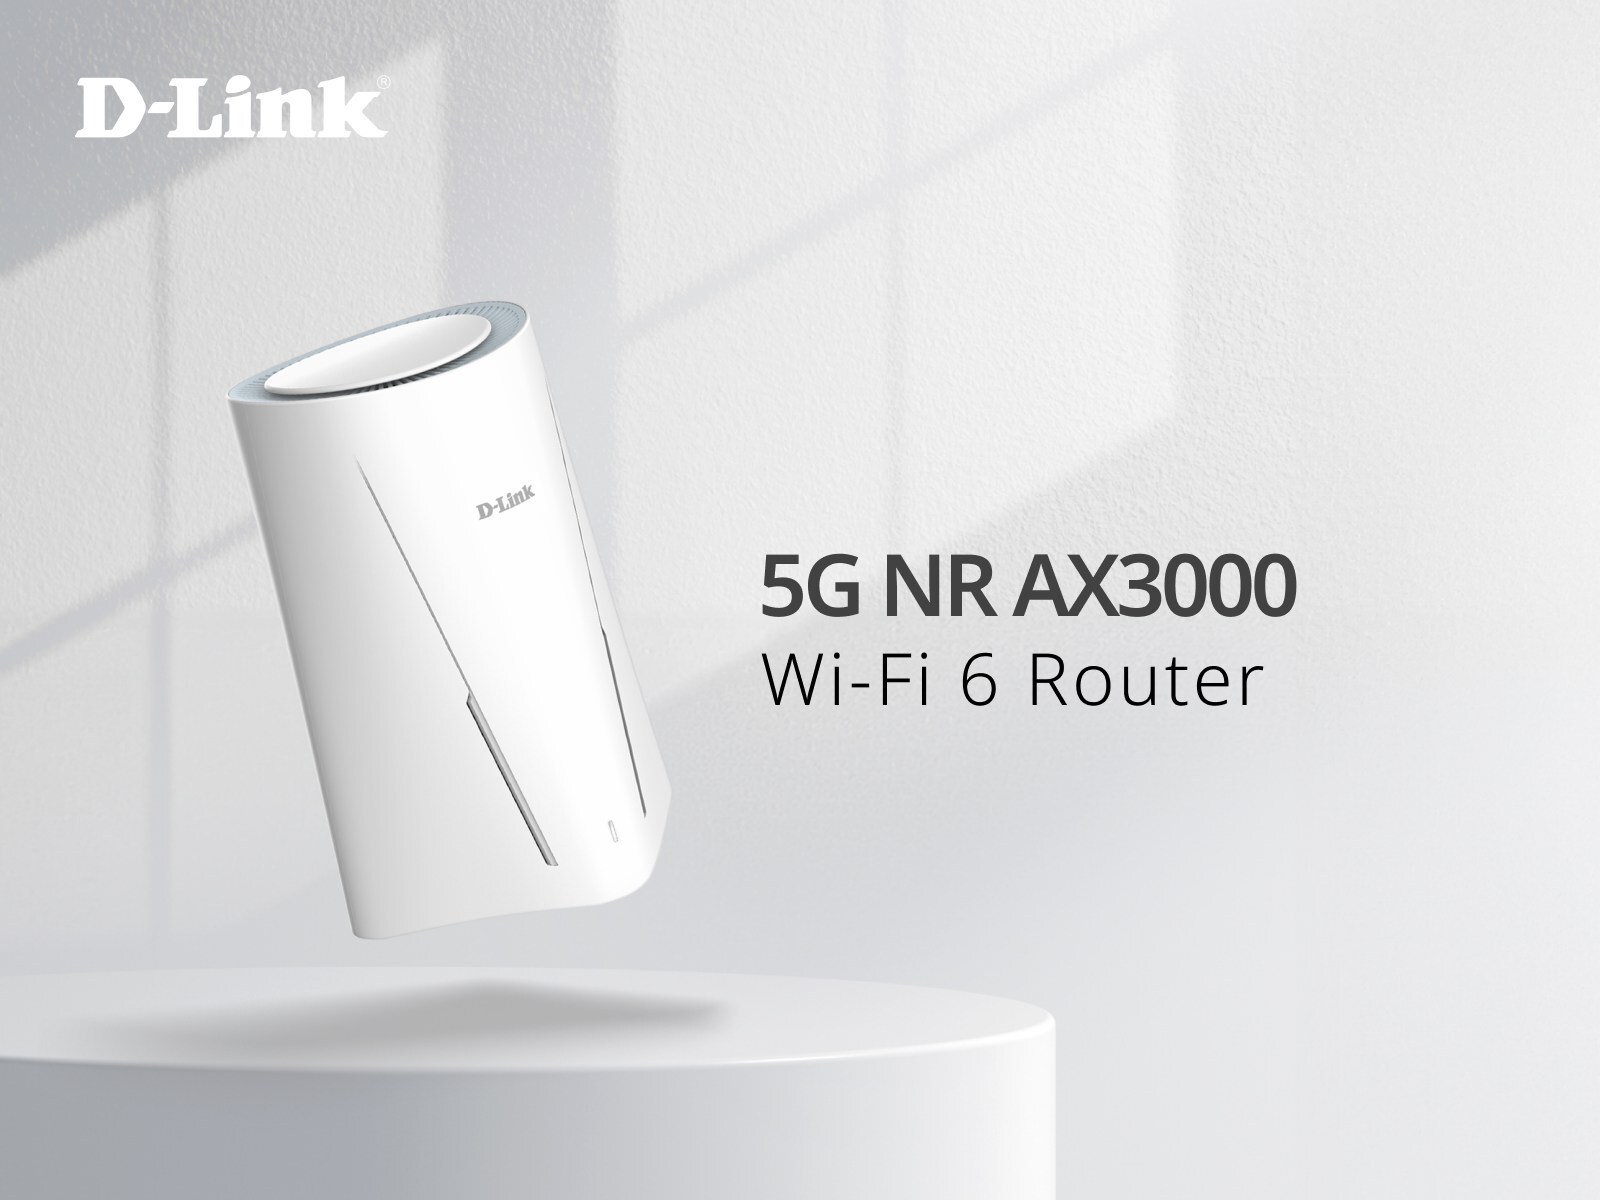 D-Link Unveils the G530 5G NR AX3000 Wi-Fi 6 Router